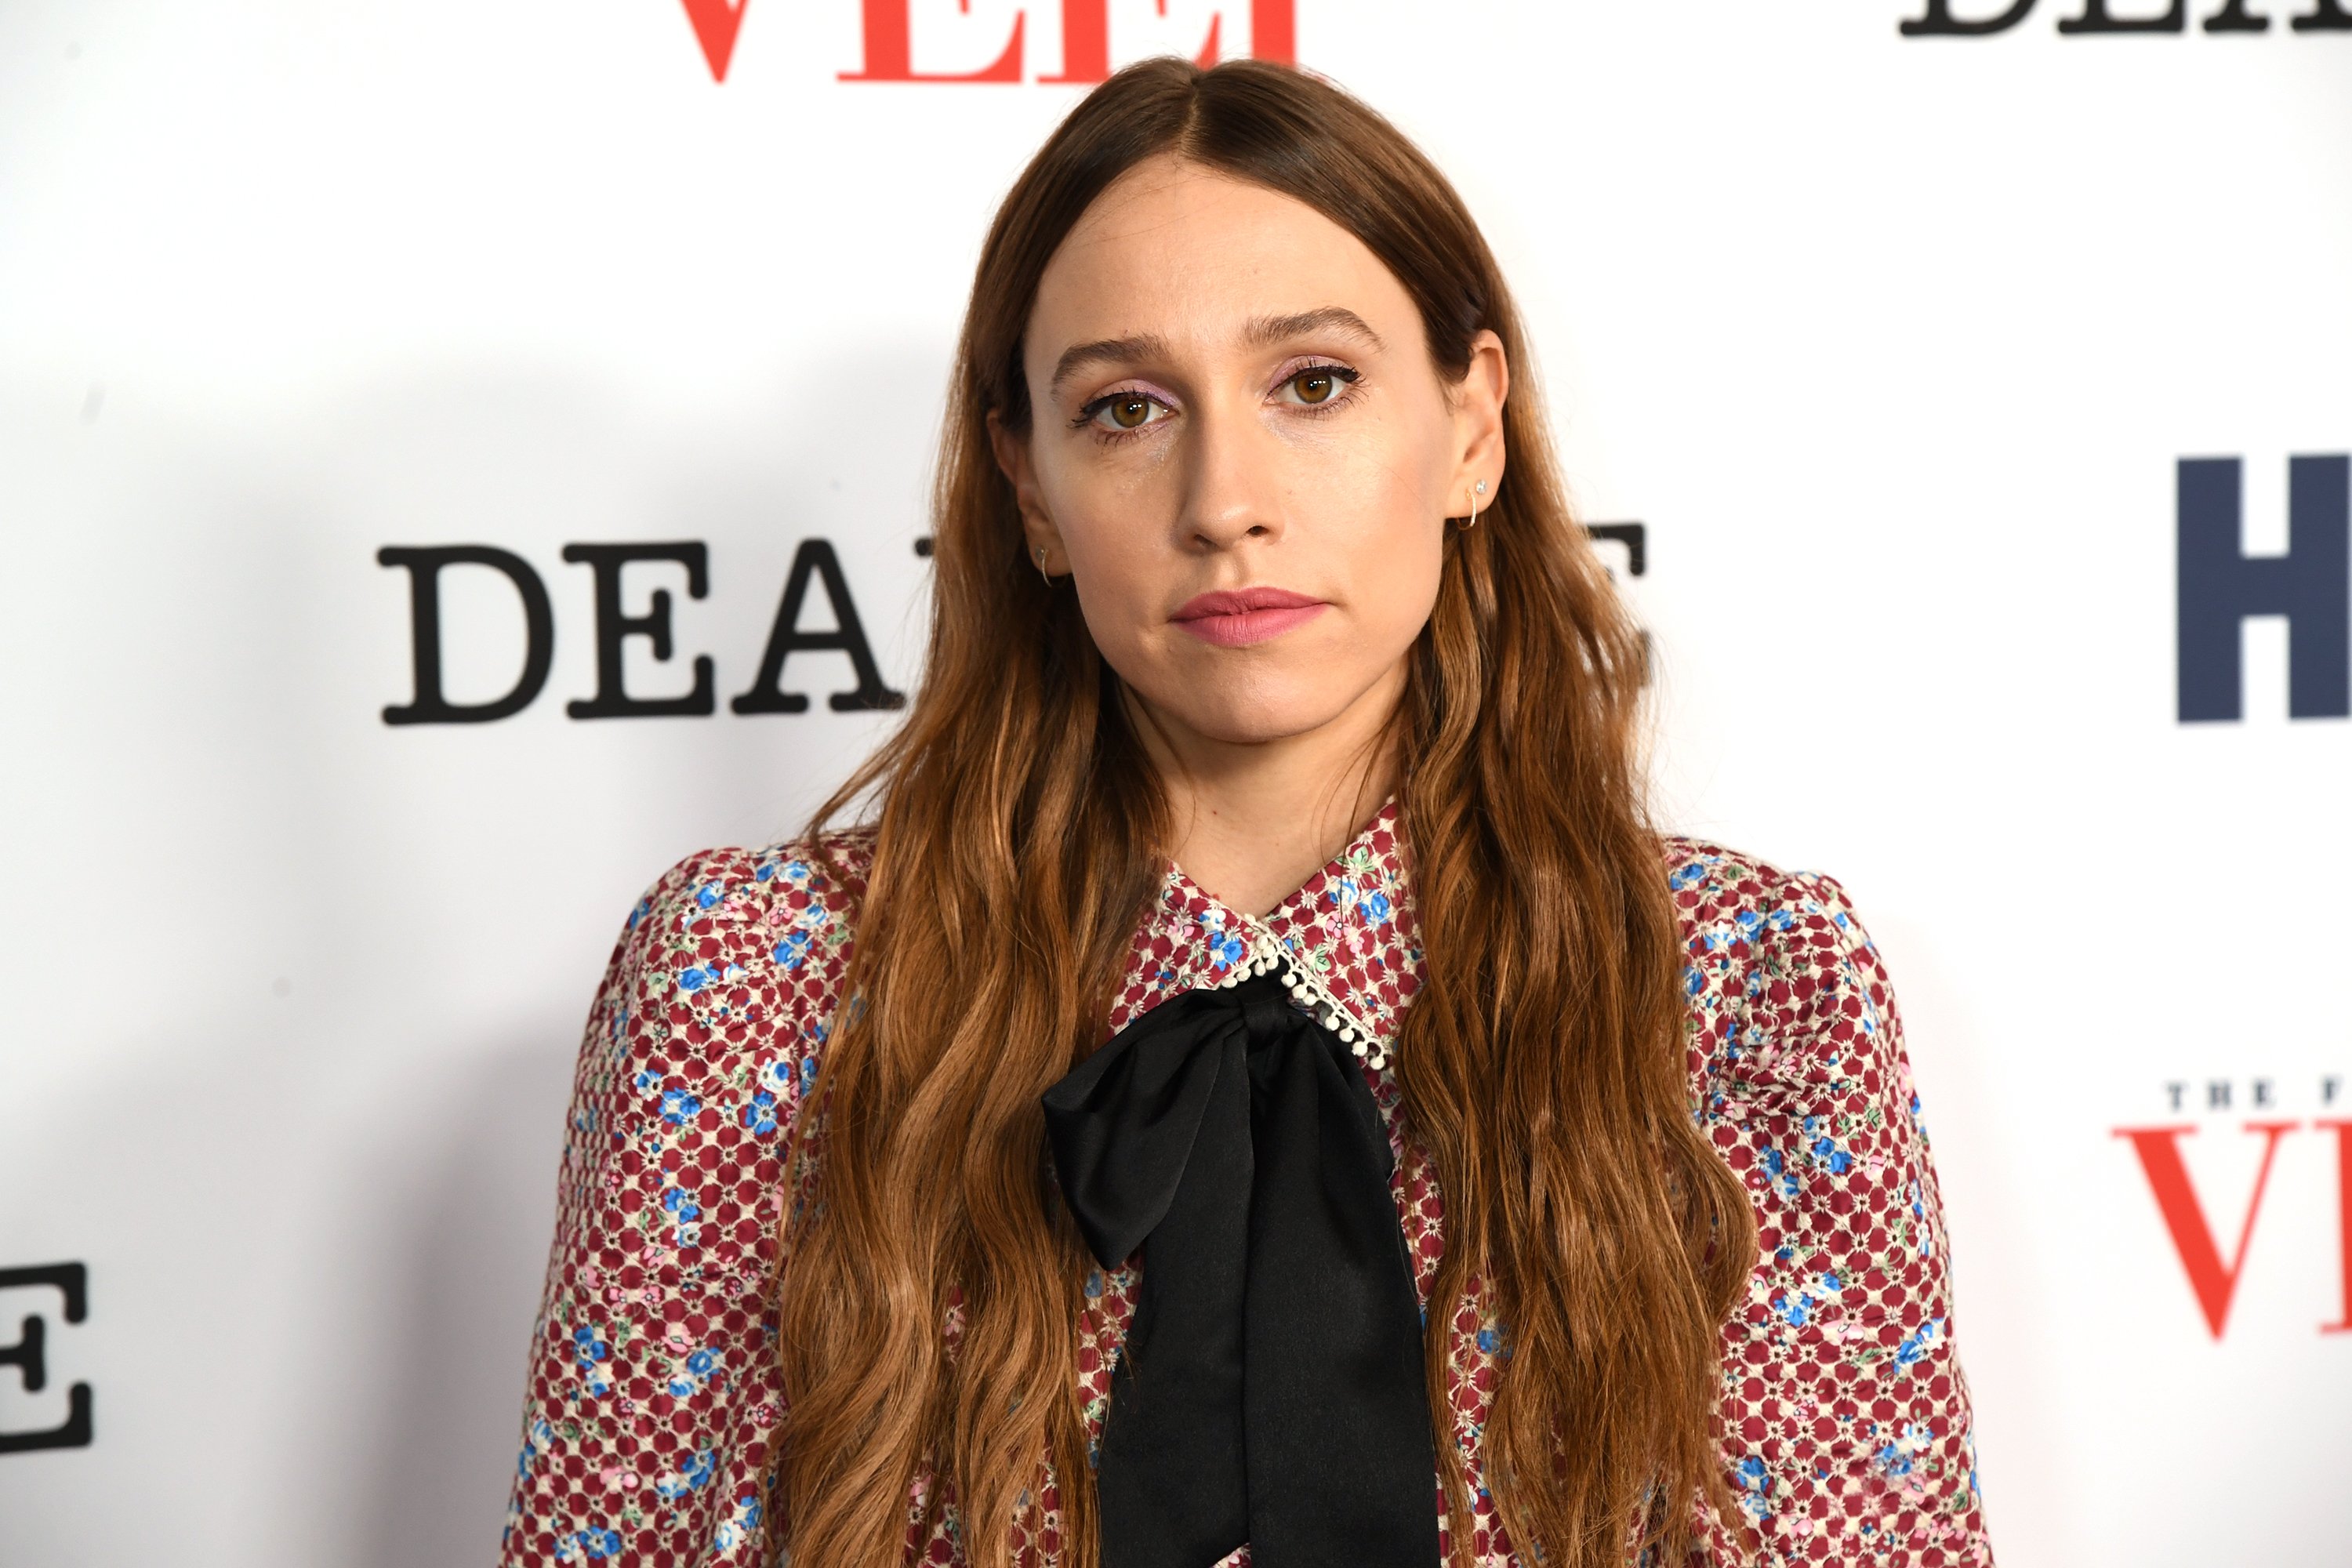 Sarah Sutherland attends HBO FYC for "VEEP" at the Landmark Theaters in Los Angeles, California on August 20, 2019  | Source: Getty Images